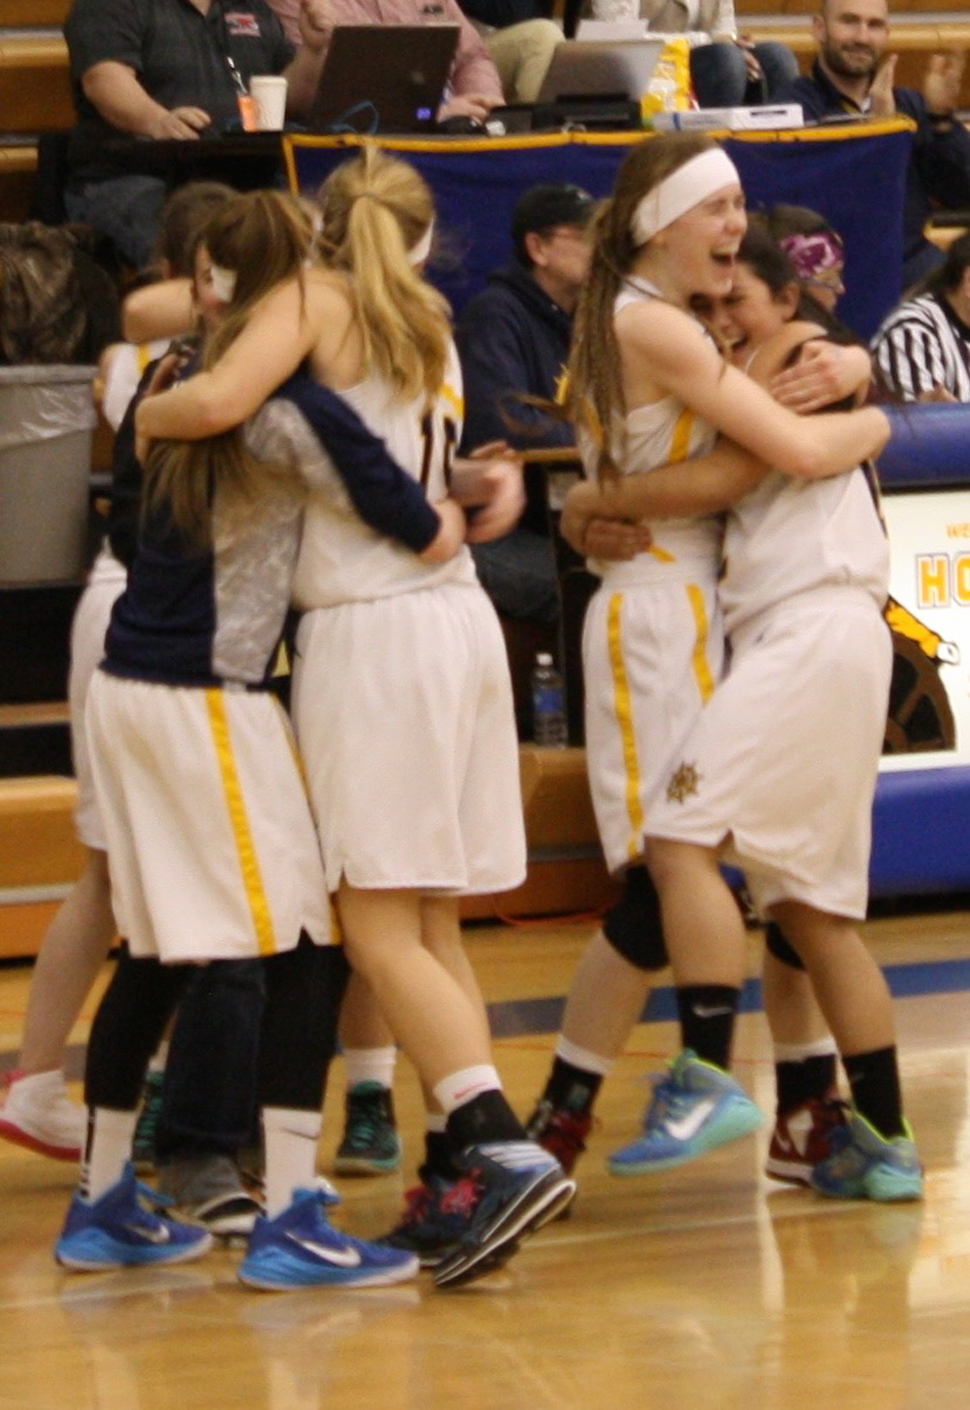 The Mariner girls basketball team celebrate their victory at Regions last weekend. The girls head to the State tournament next week.-Photo by Lindsay Olsen